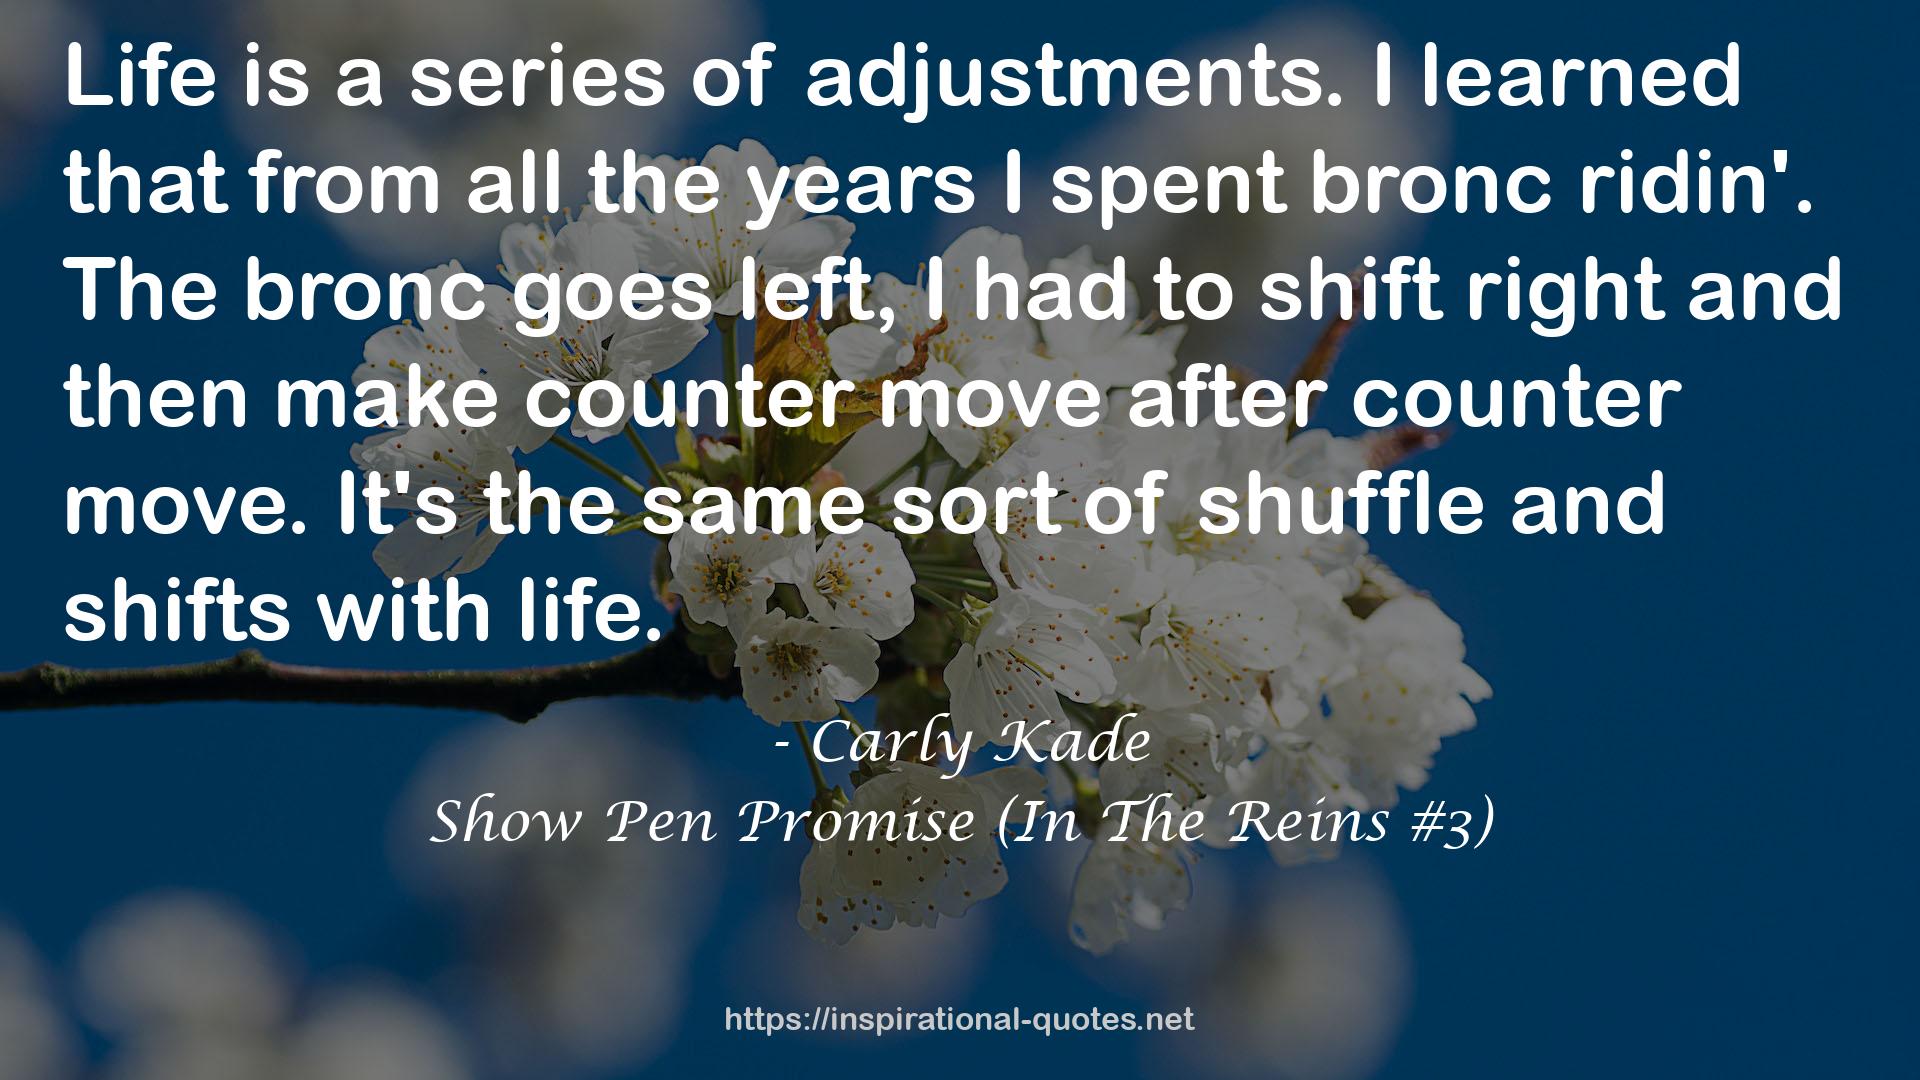 Show Pen Promise (In The Reins #3) QUOTES